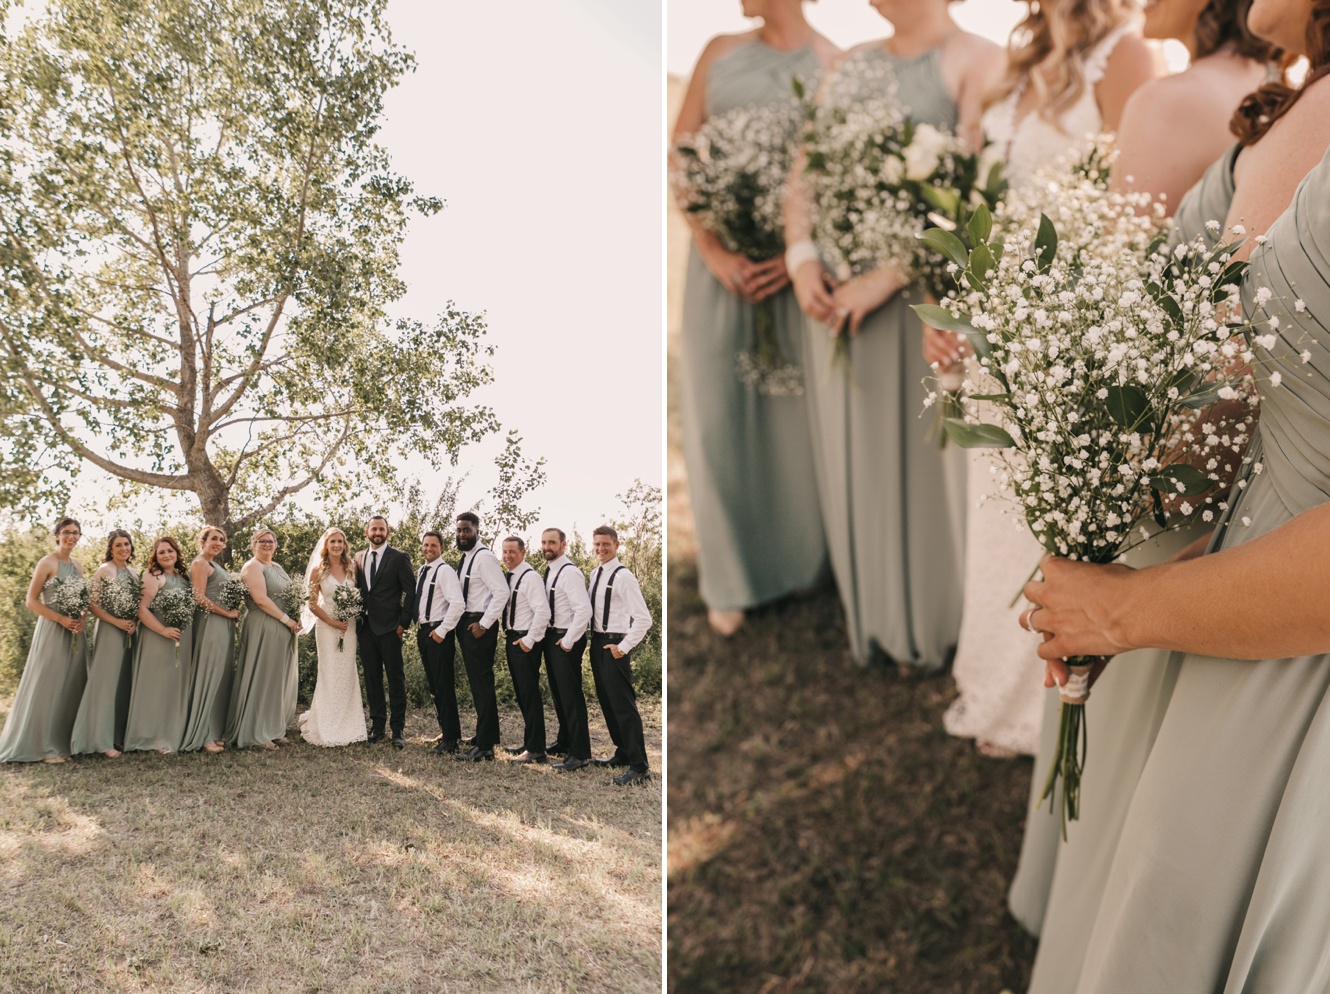 moss bridesmaid gowns